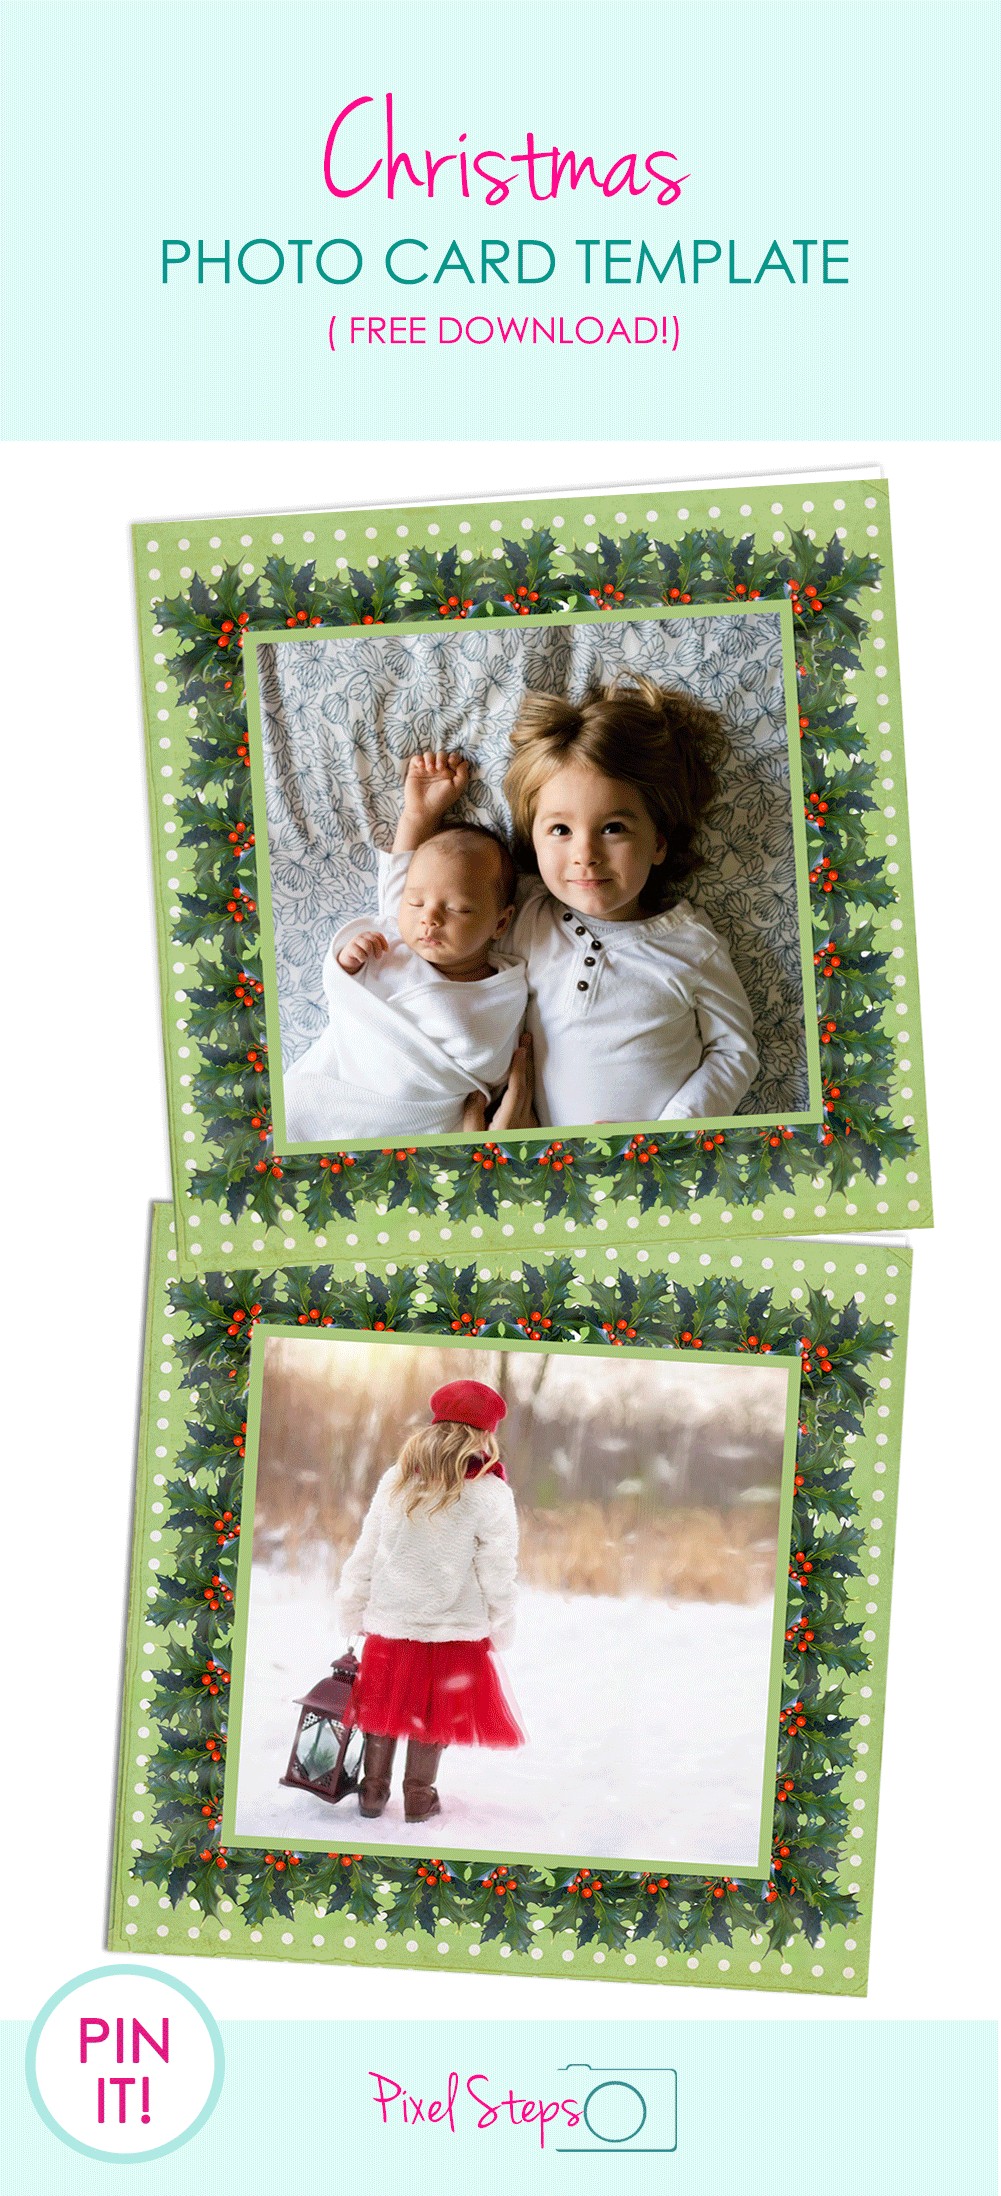 Christmas Card Template Free Printable Photo Greeting Cards Photoshop Templates Download